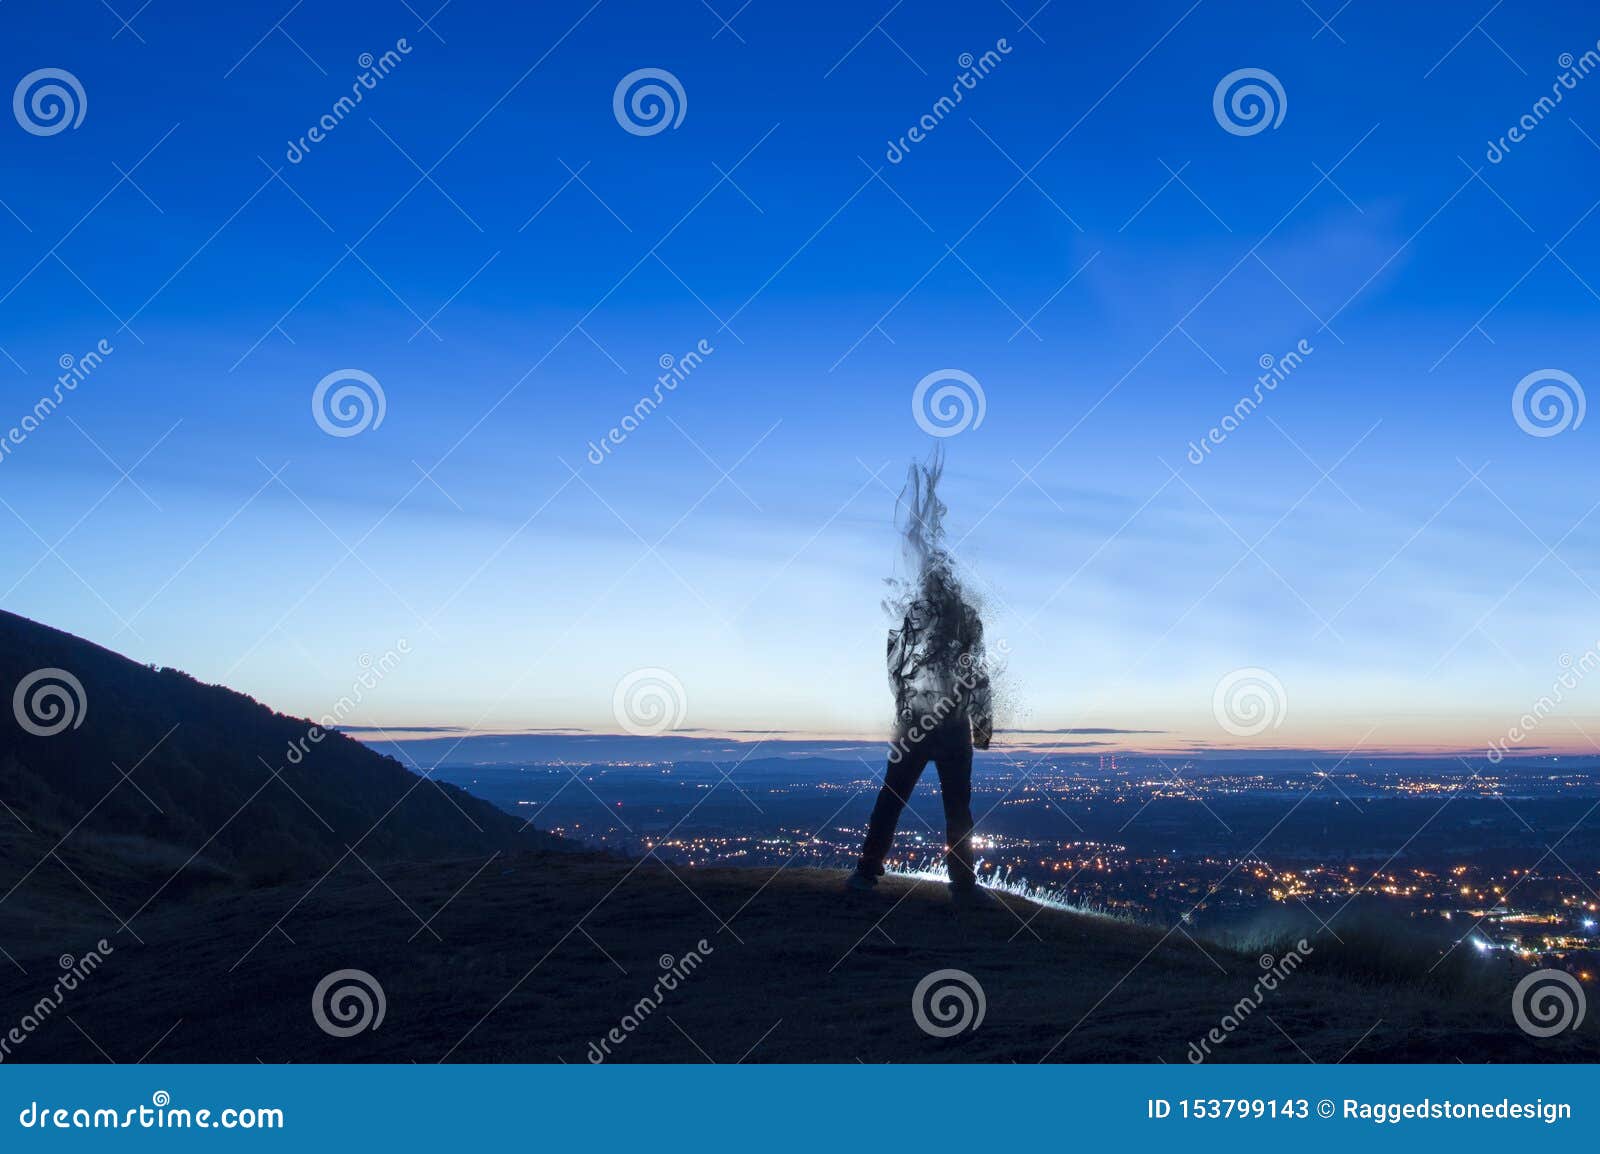 a silhouette of a man disappearing and turning into smoke. standing on a hill. lookng out on city lights just before sunrise